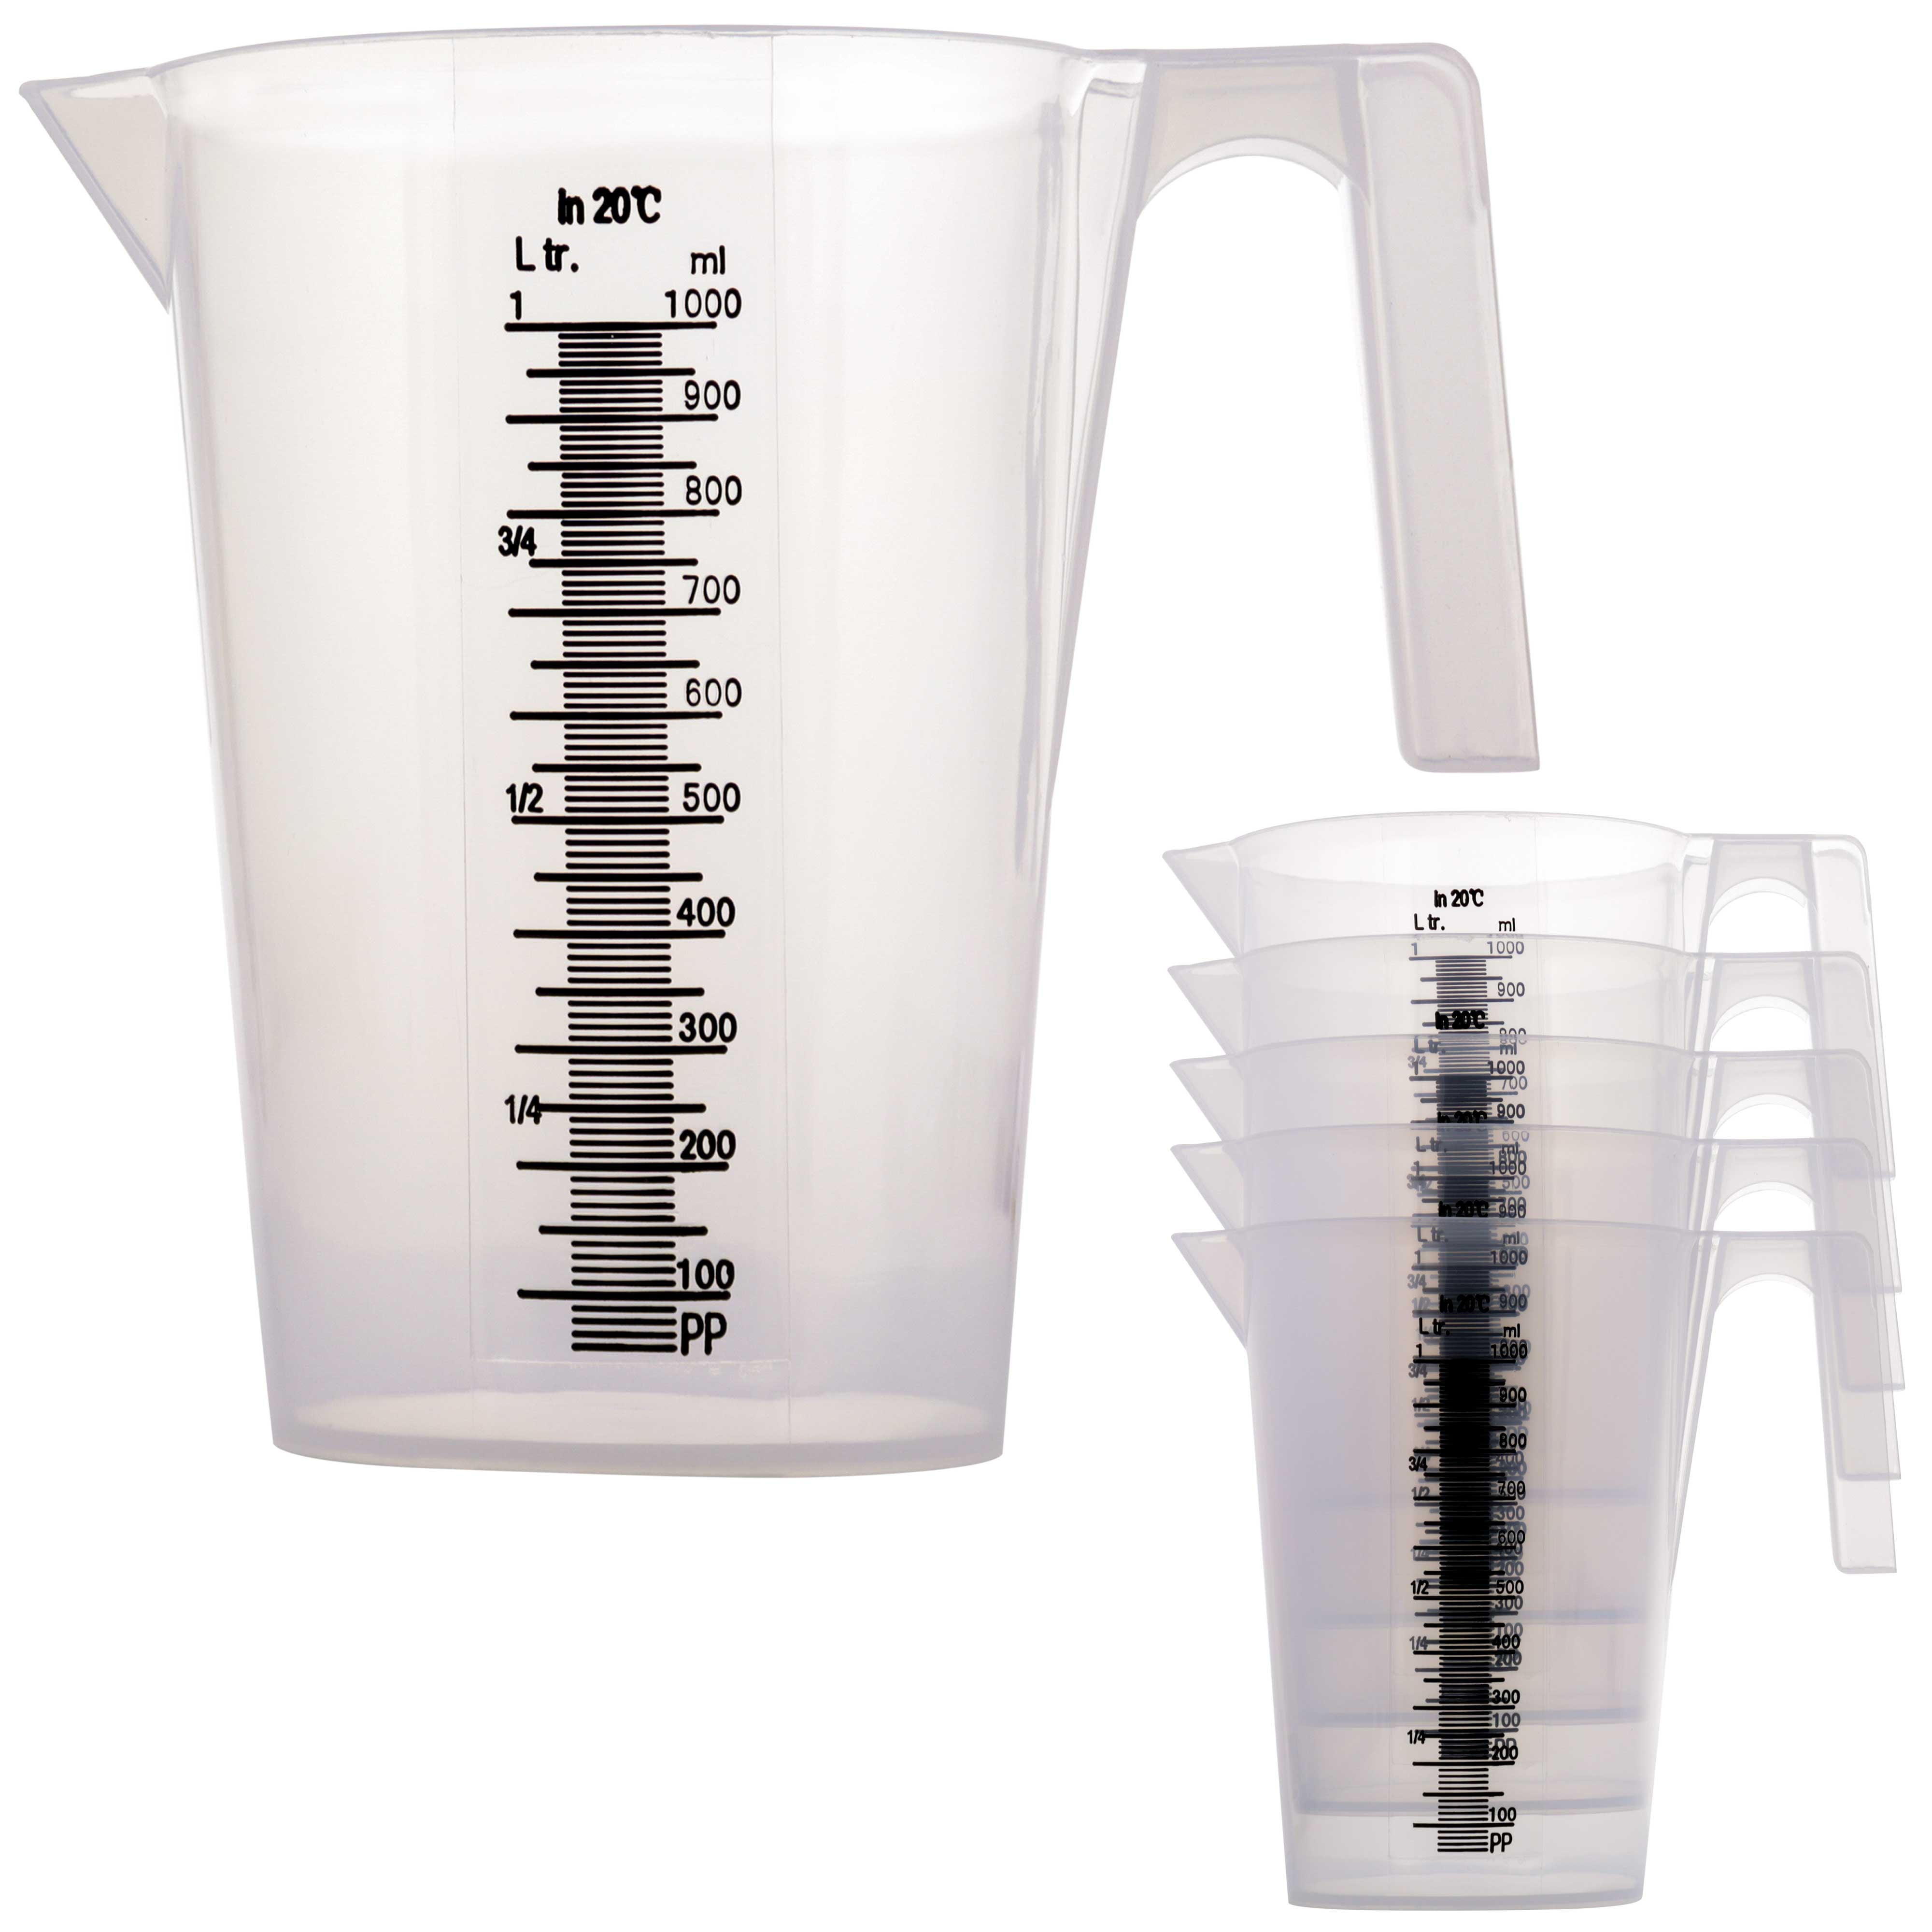 Choice 1/2 Qt. Aluminum Measuring Cup with Handle and Pour Lip